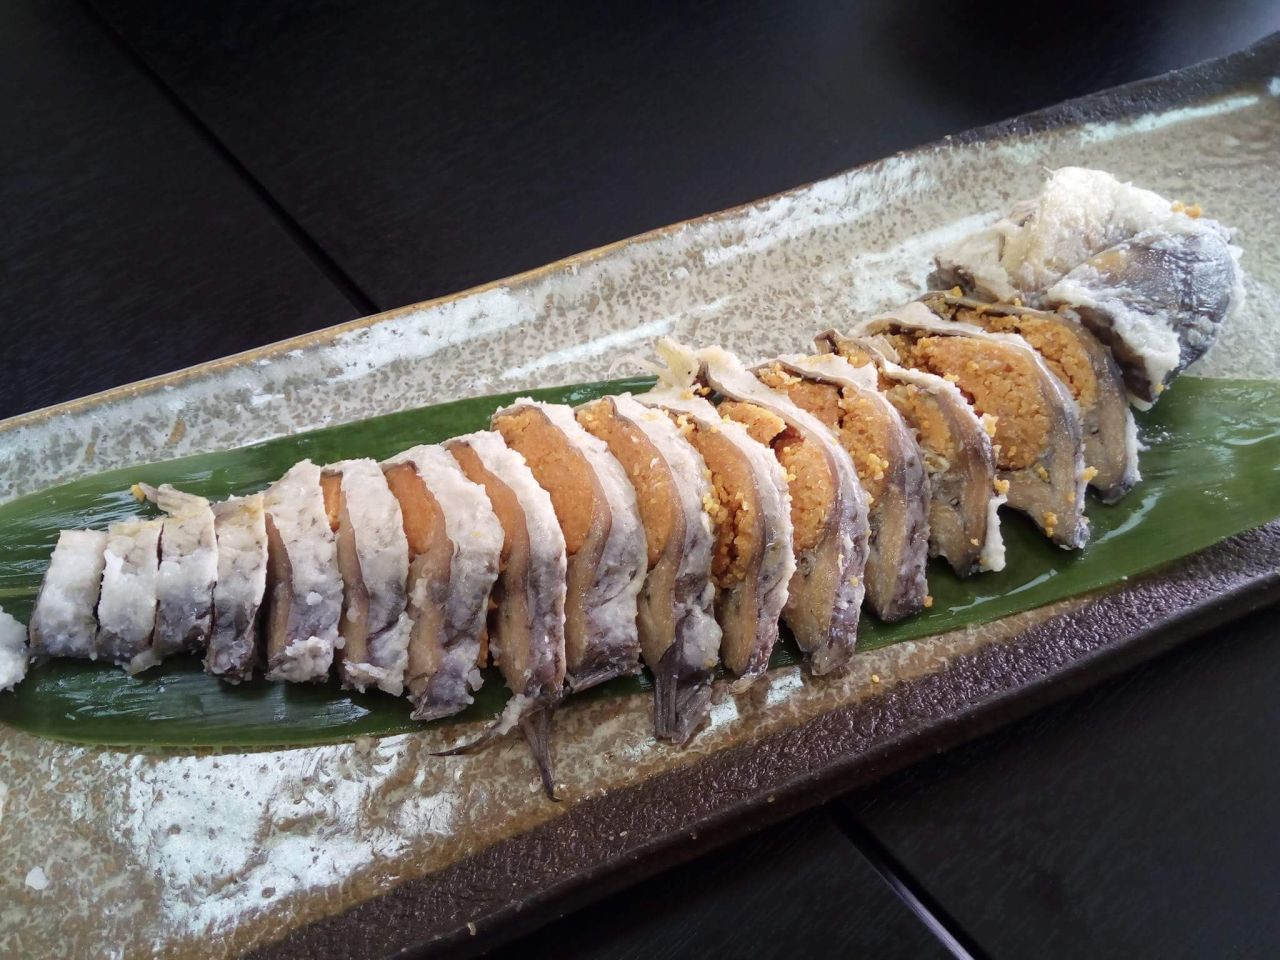 <strong>The granddaddy of sushi: </strong><em>Narezushi</em>, the most primitive form of sushi, is a world away from your California rolls and sliced sashimi. Dating back to the 10th century, this fermented fish was preserved with salt and raw rice, eventually giving way to the <em>nigiri</em> (sliced seafood atop rice) we know and love today. It's still common in Japan's Shiga prefecture. 